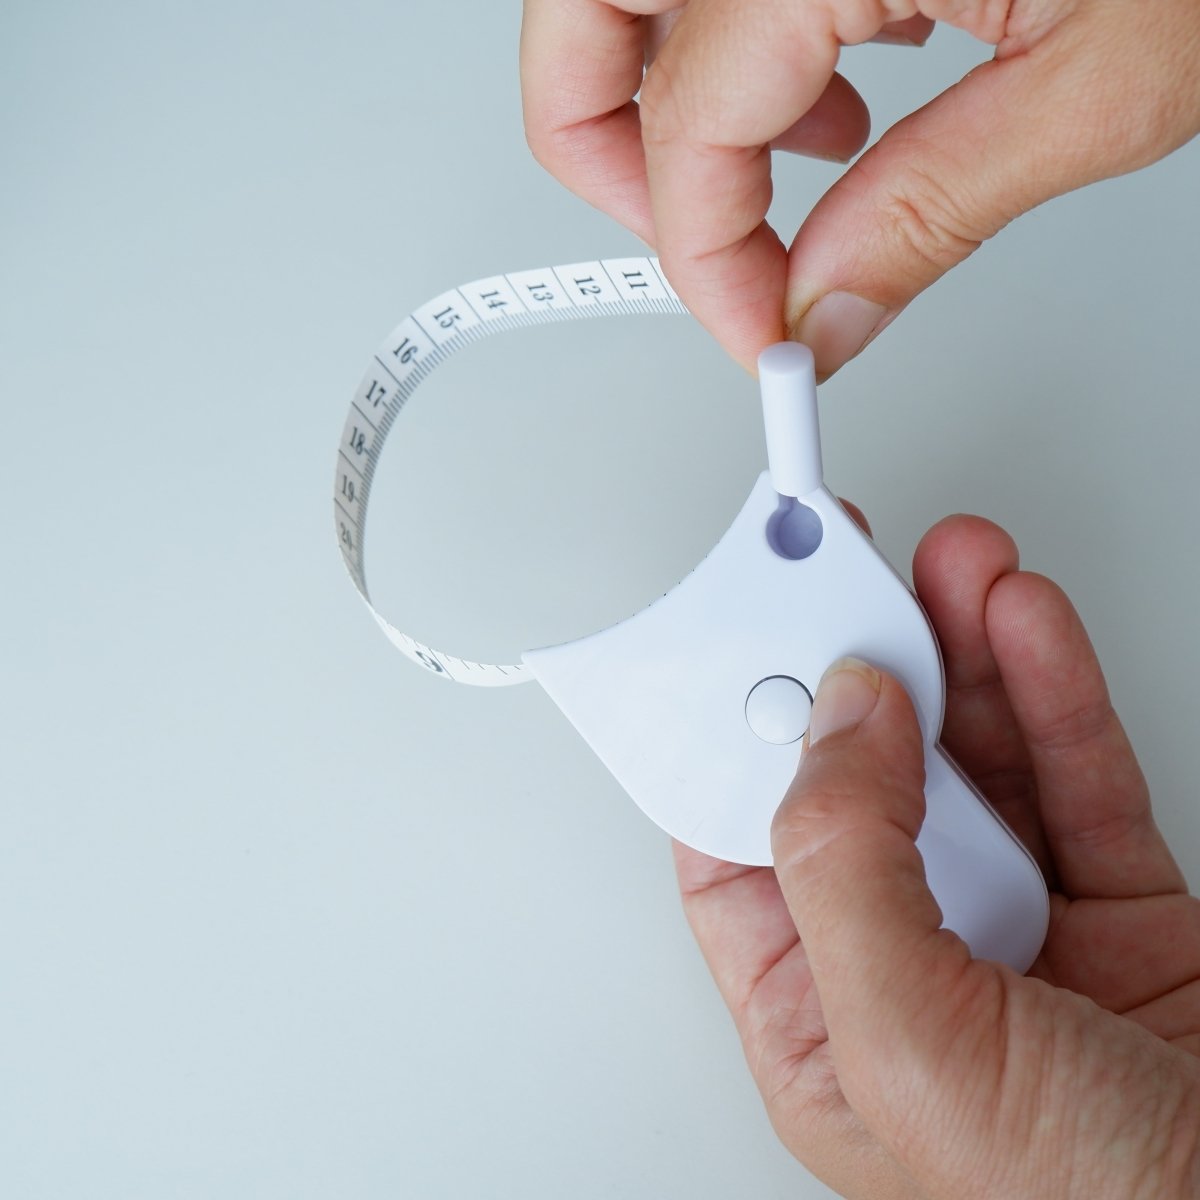 Body Self Measuring Tape - A Must Have For Any Seamstress